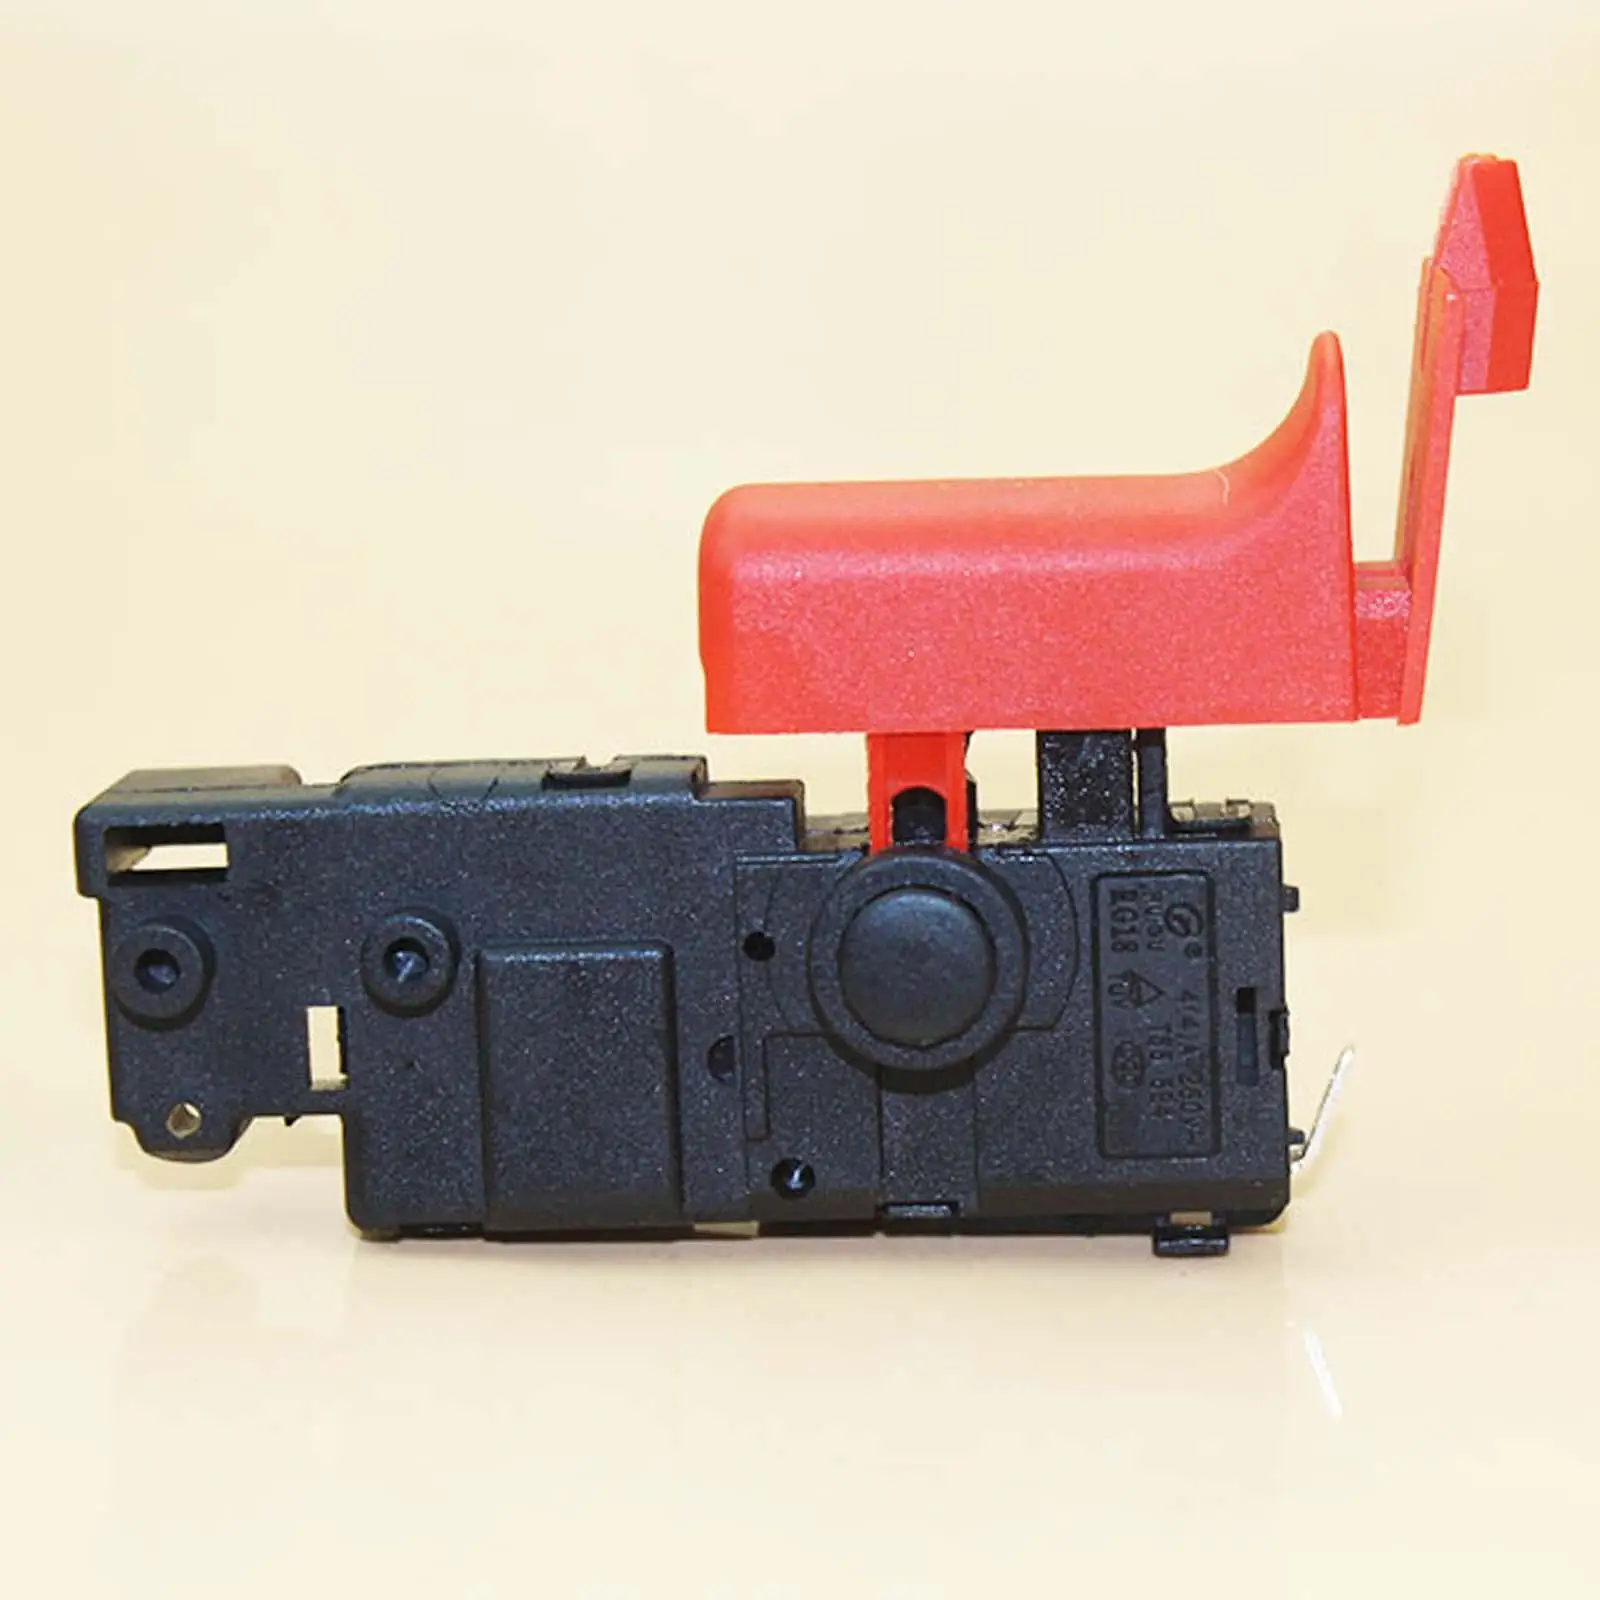 Rotory Hammer Switch Replacement for GBH 2-28 D/22/26 GBH2-26DRE